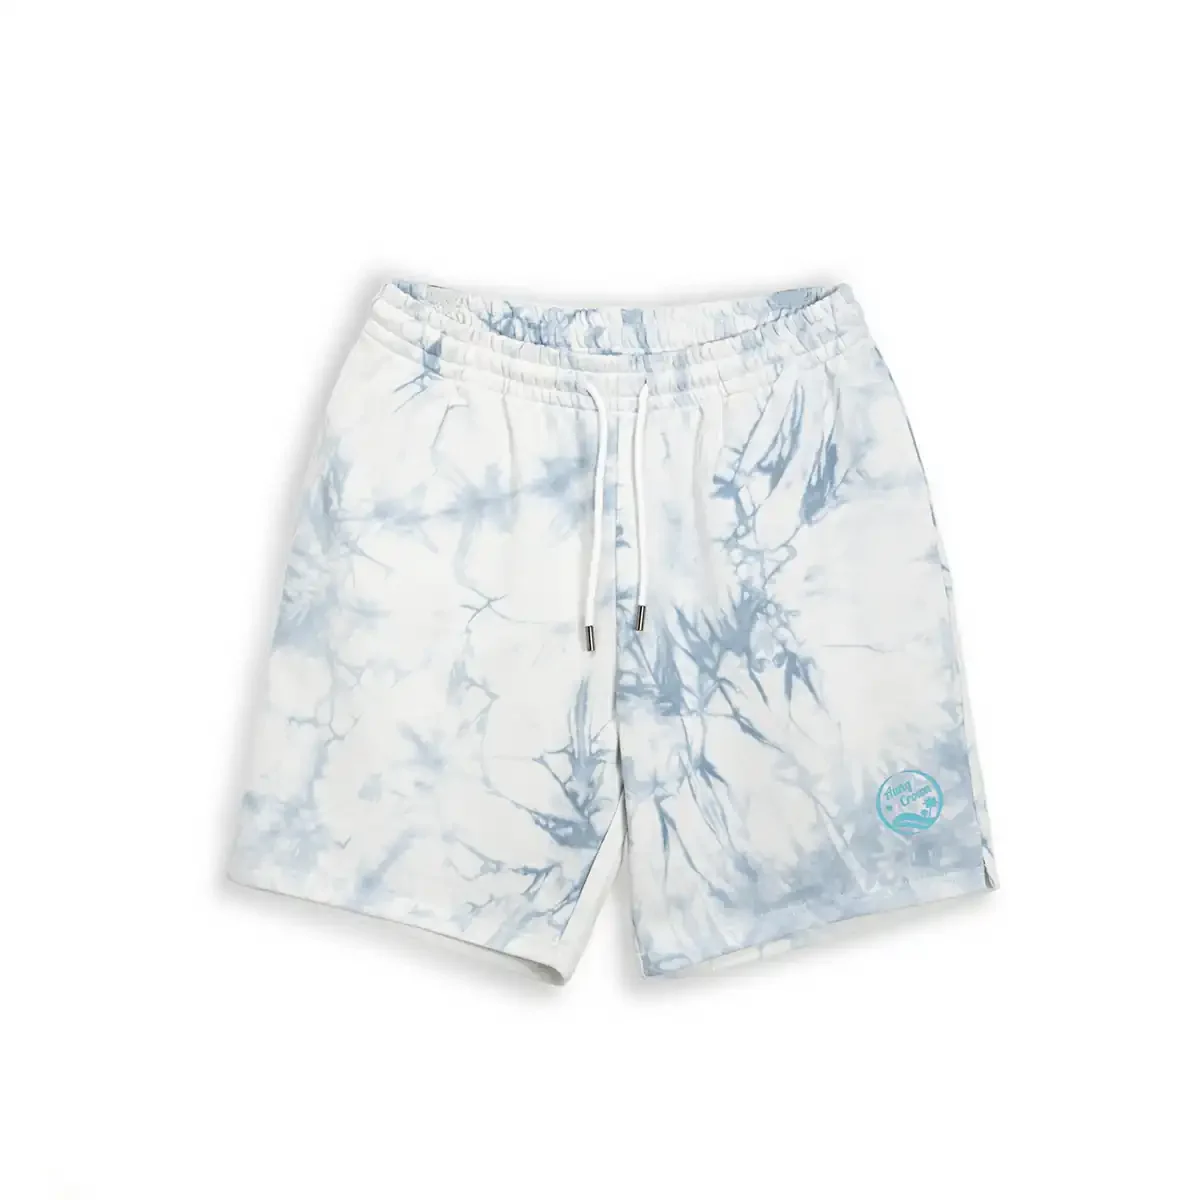 mens-blue-and-white-shorts-SFA-210401-5-1